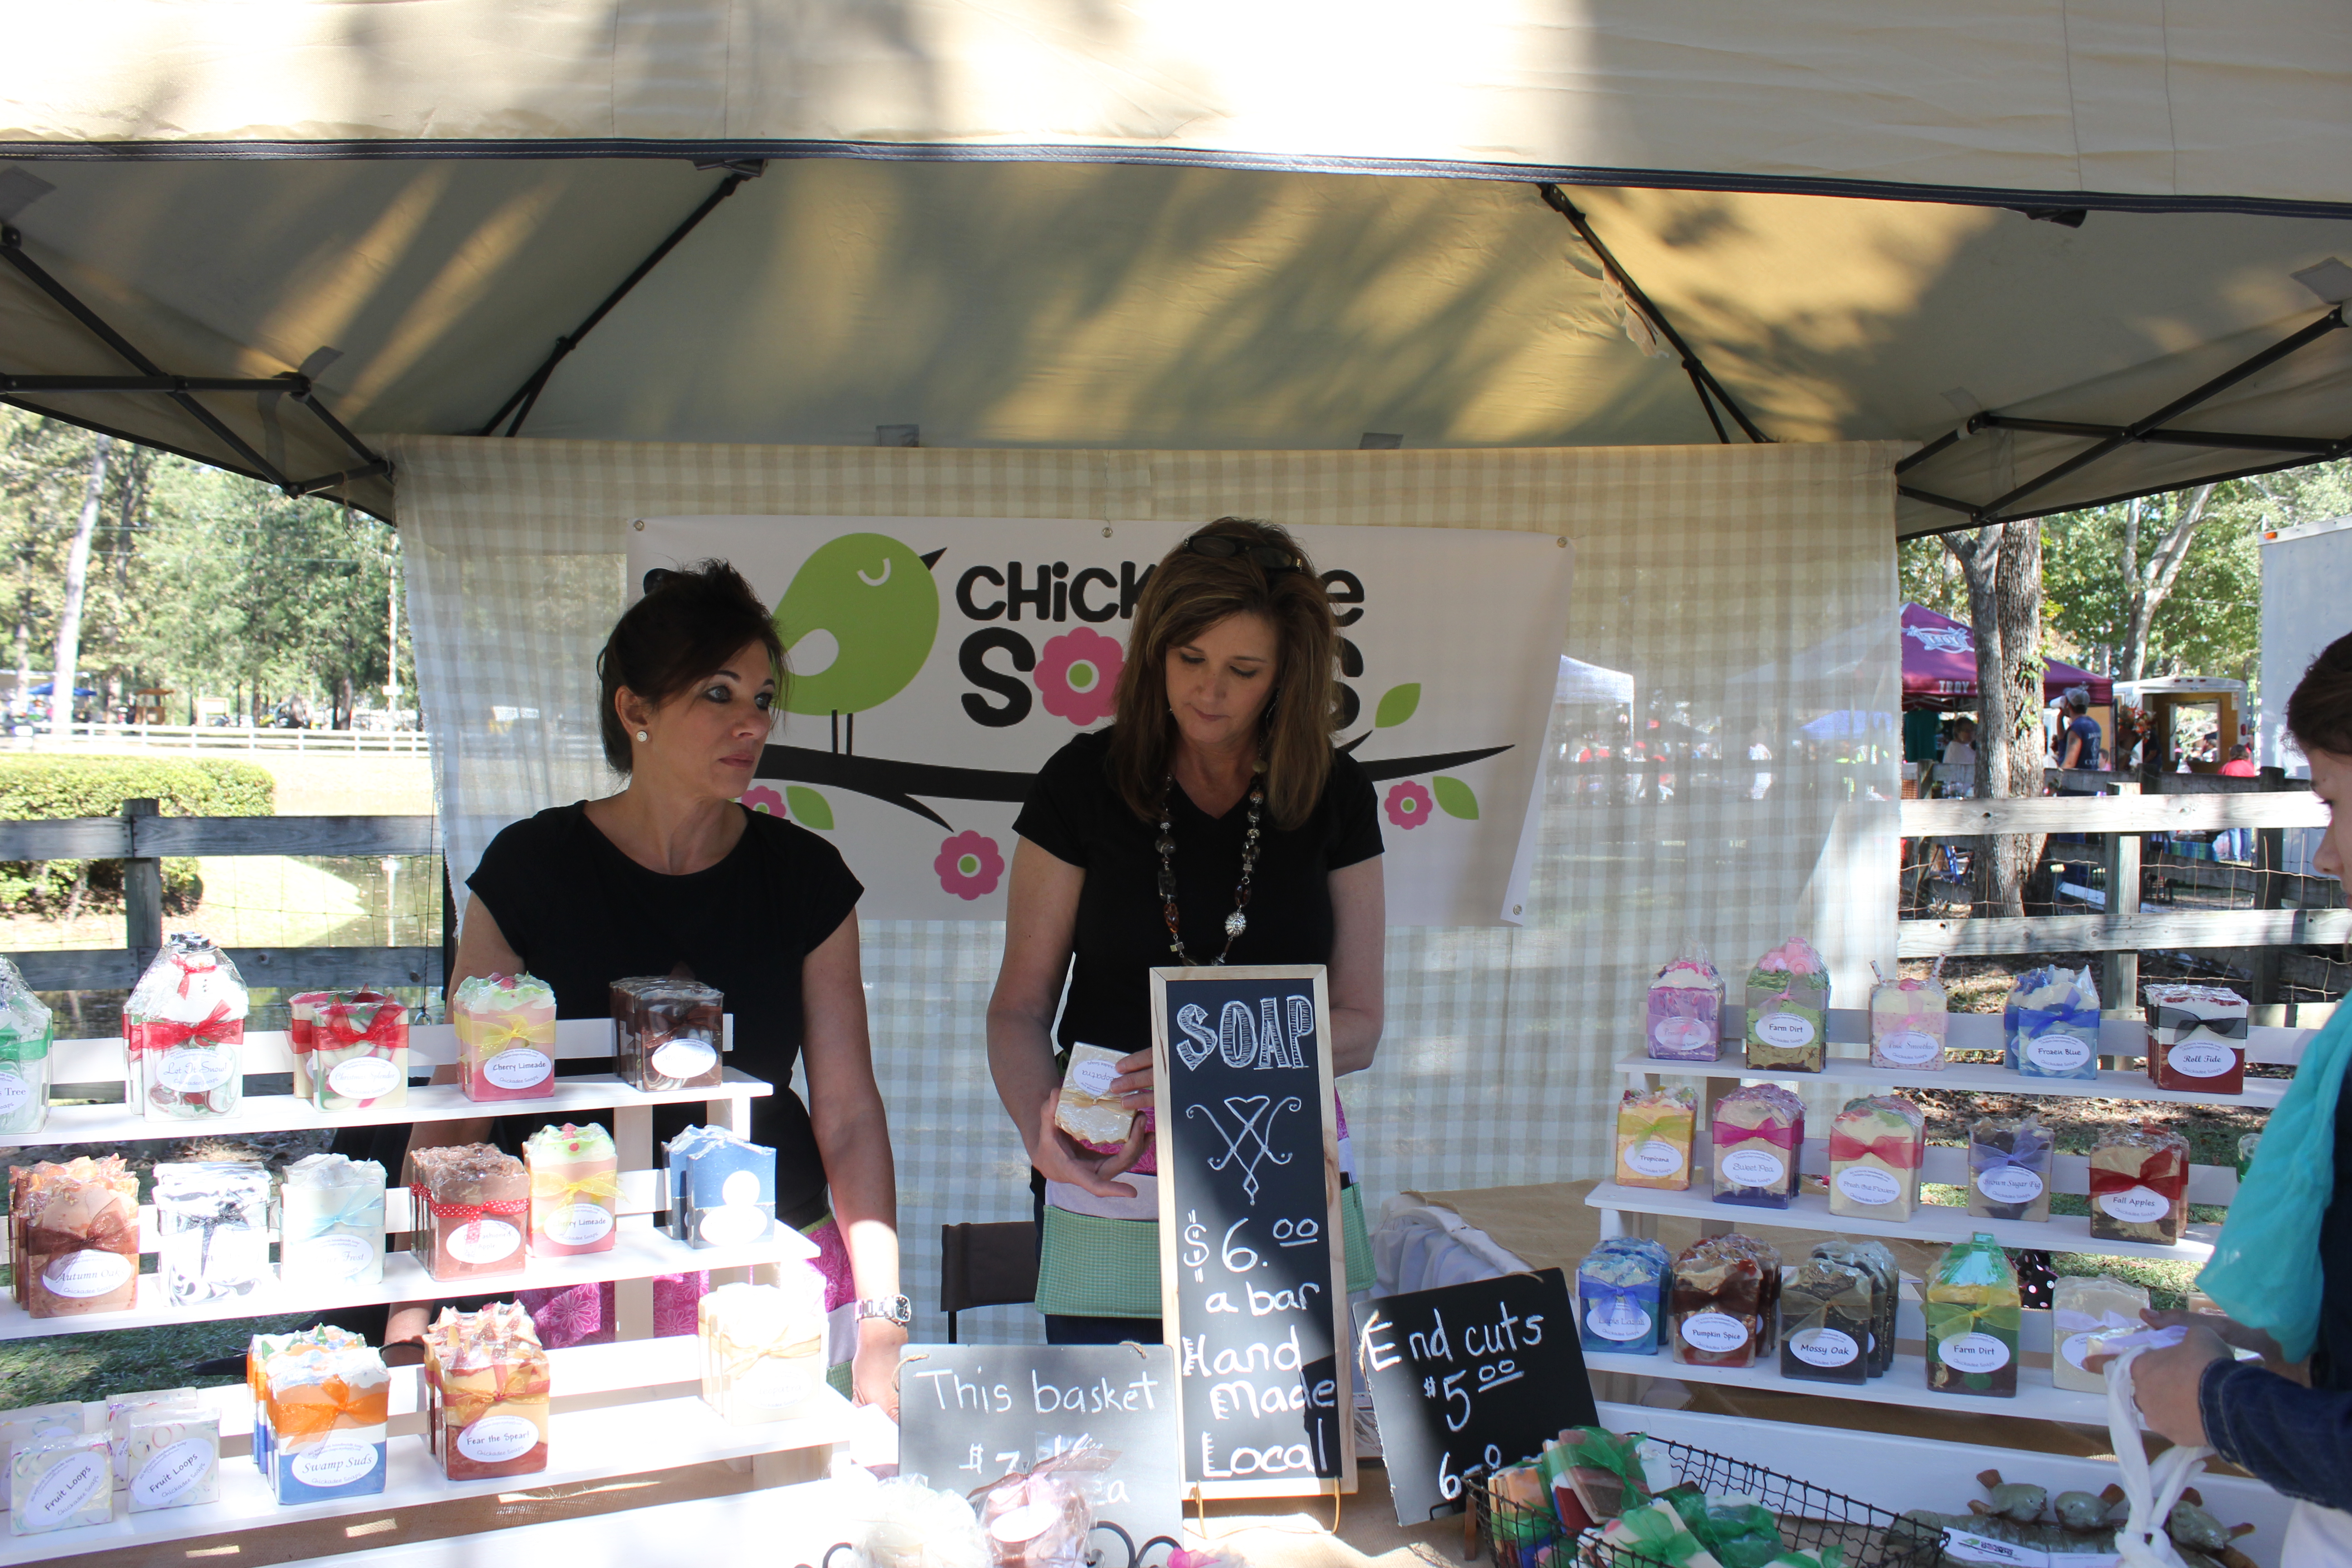 One of the many vendors at the festival, Chickadee Handmade Soaps.